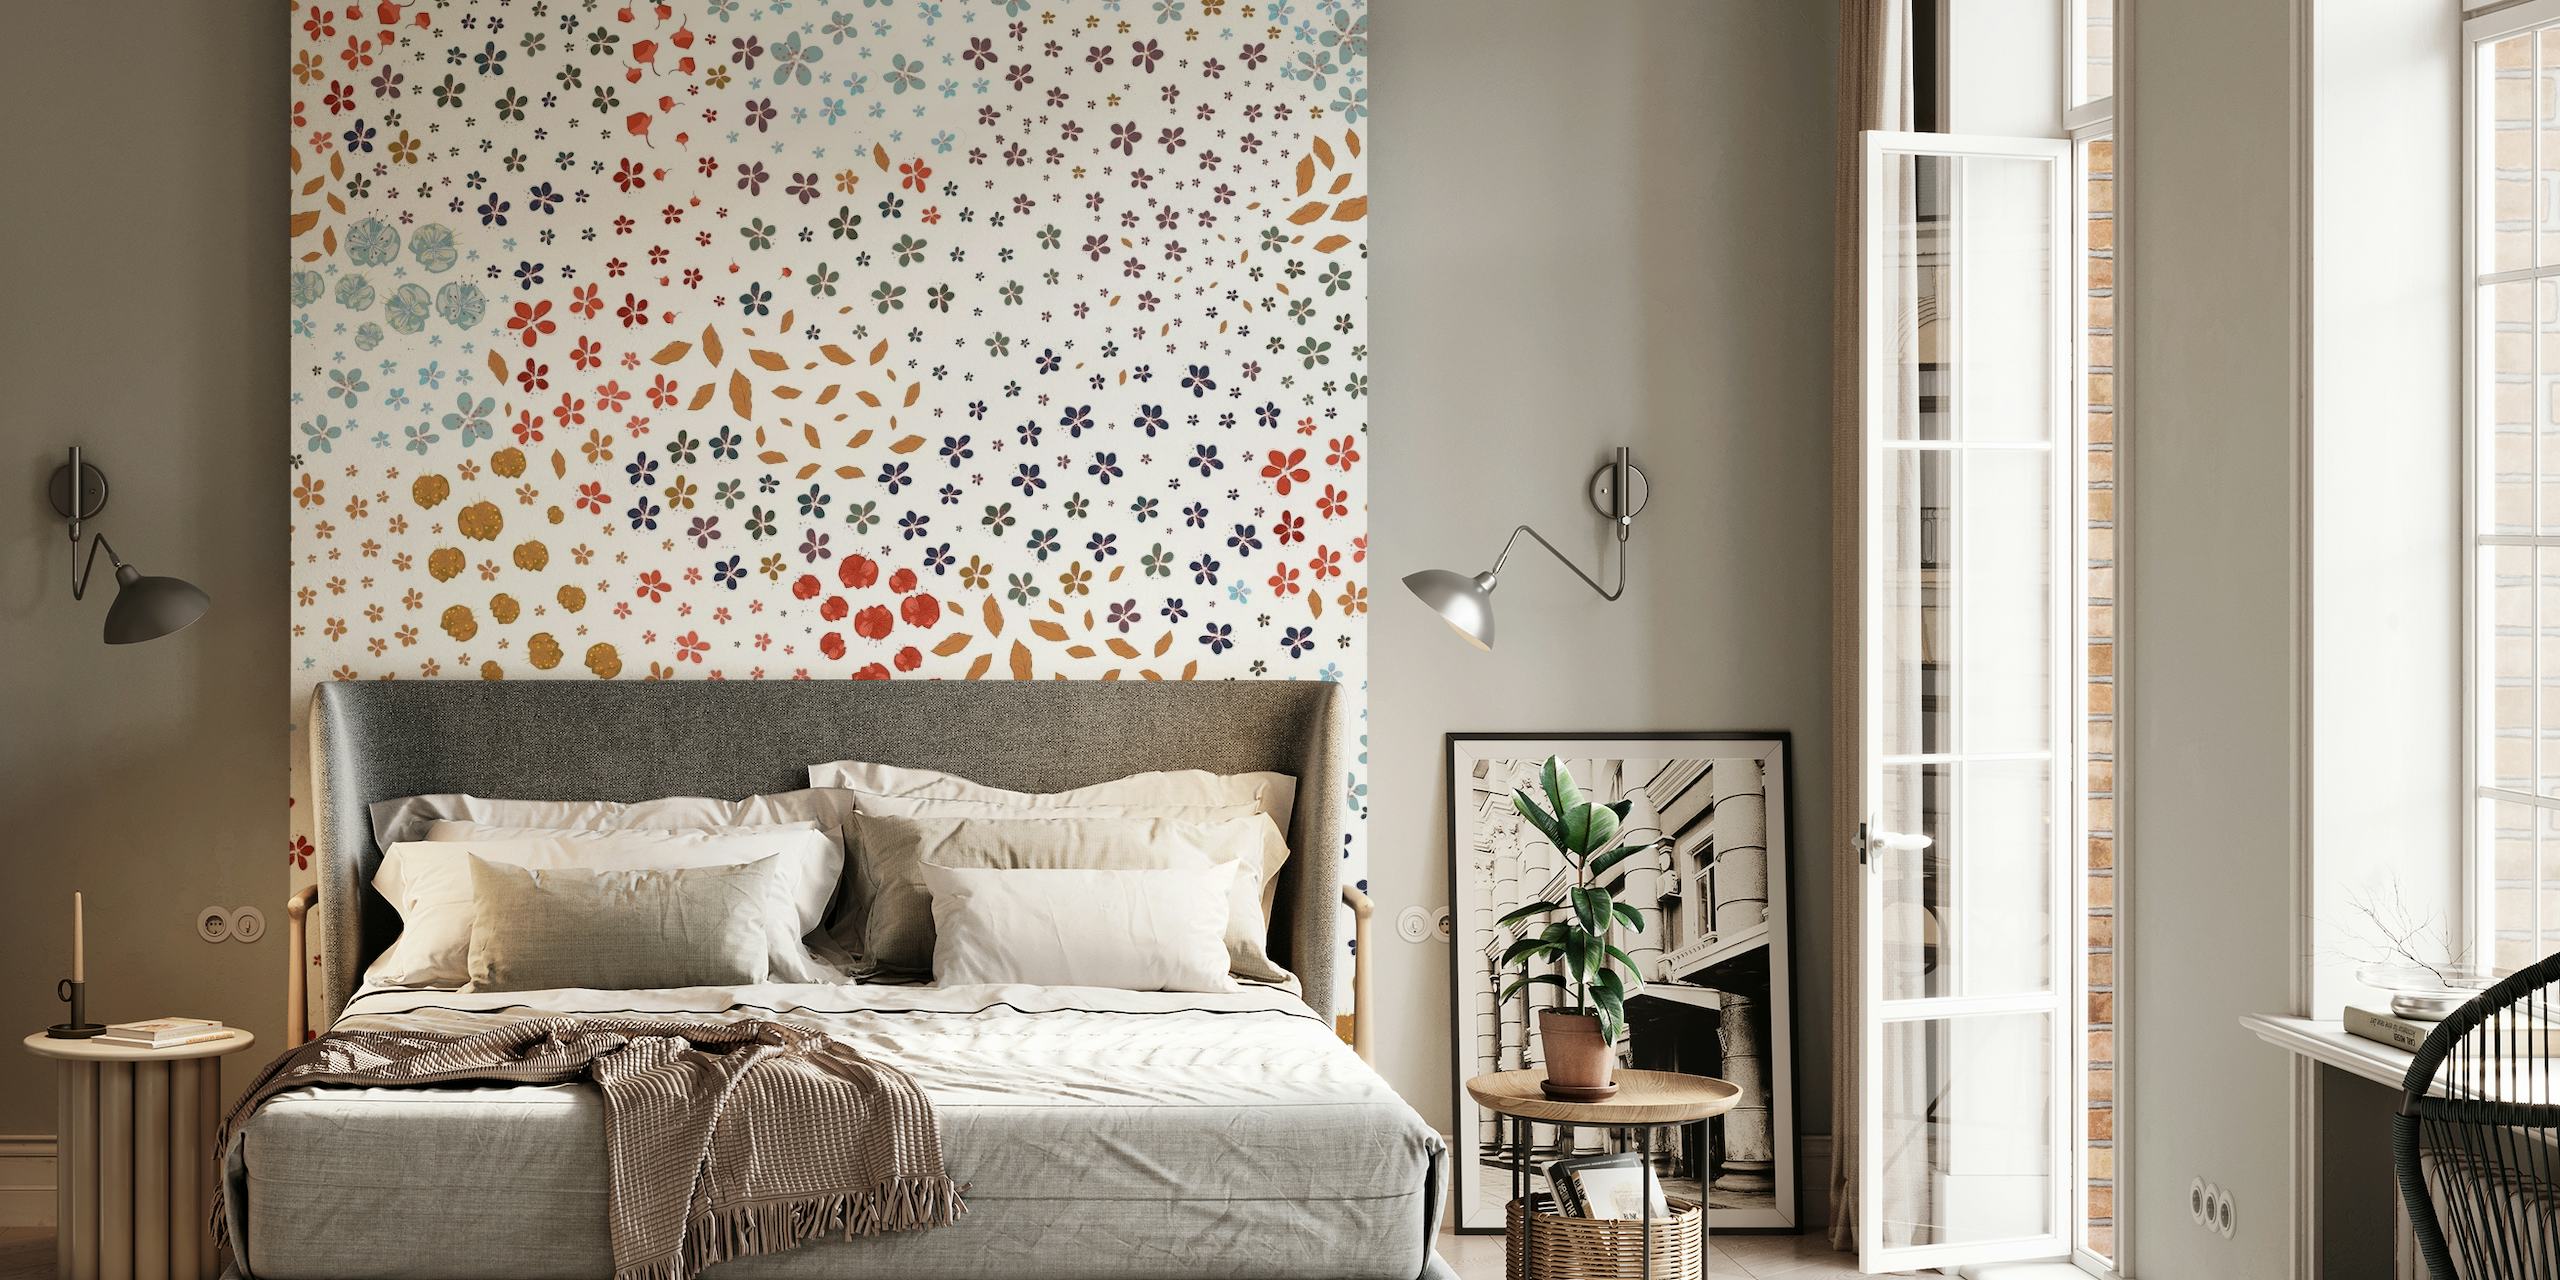 Colorful and intricate spring-themed wall mural with floral and geometric patterns